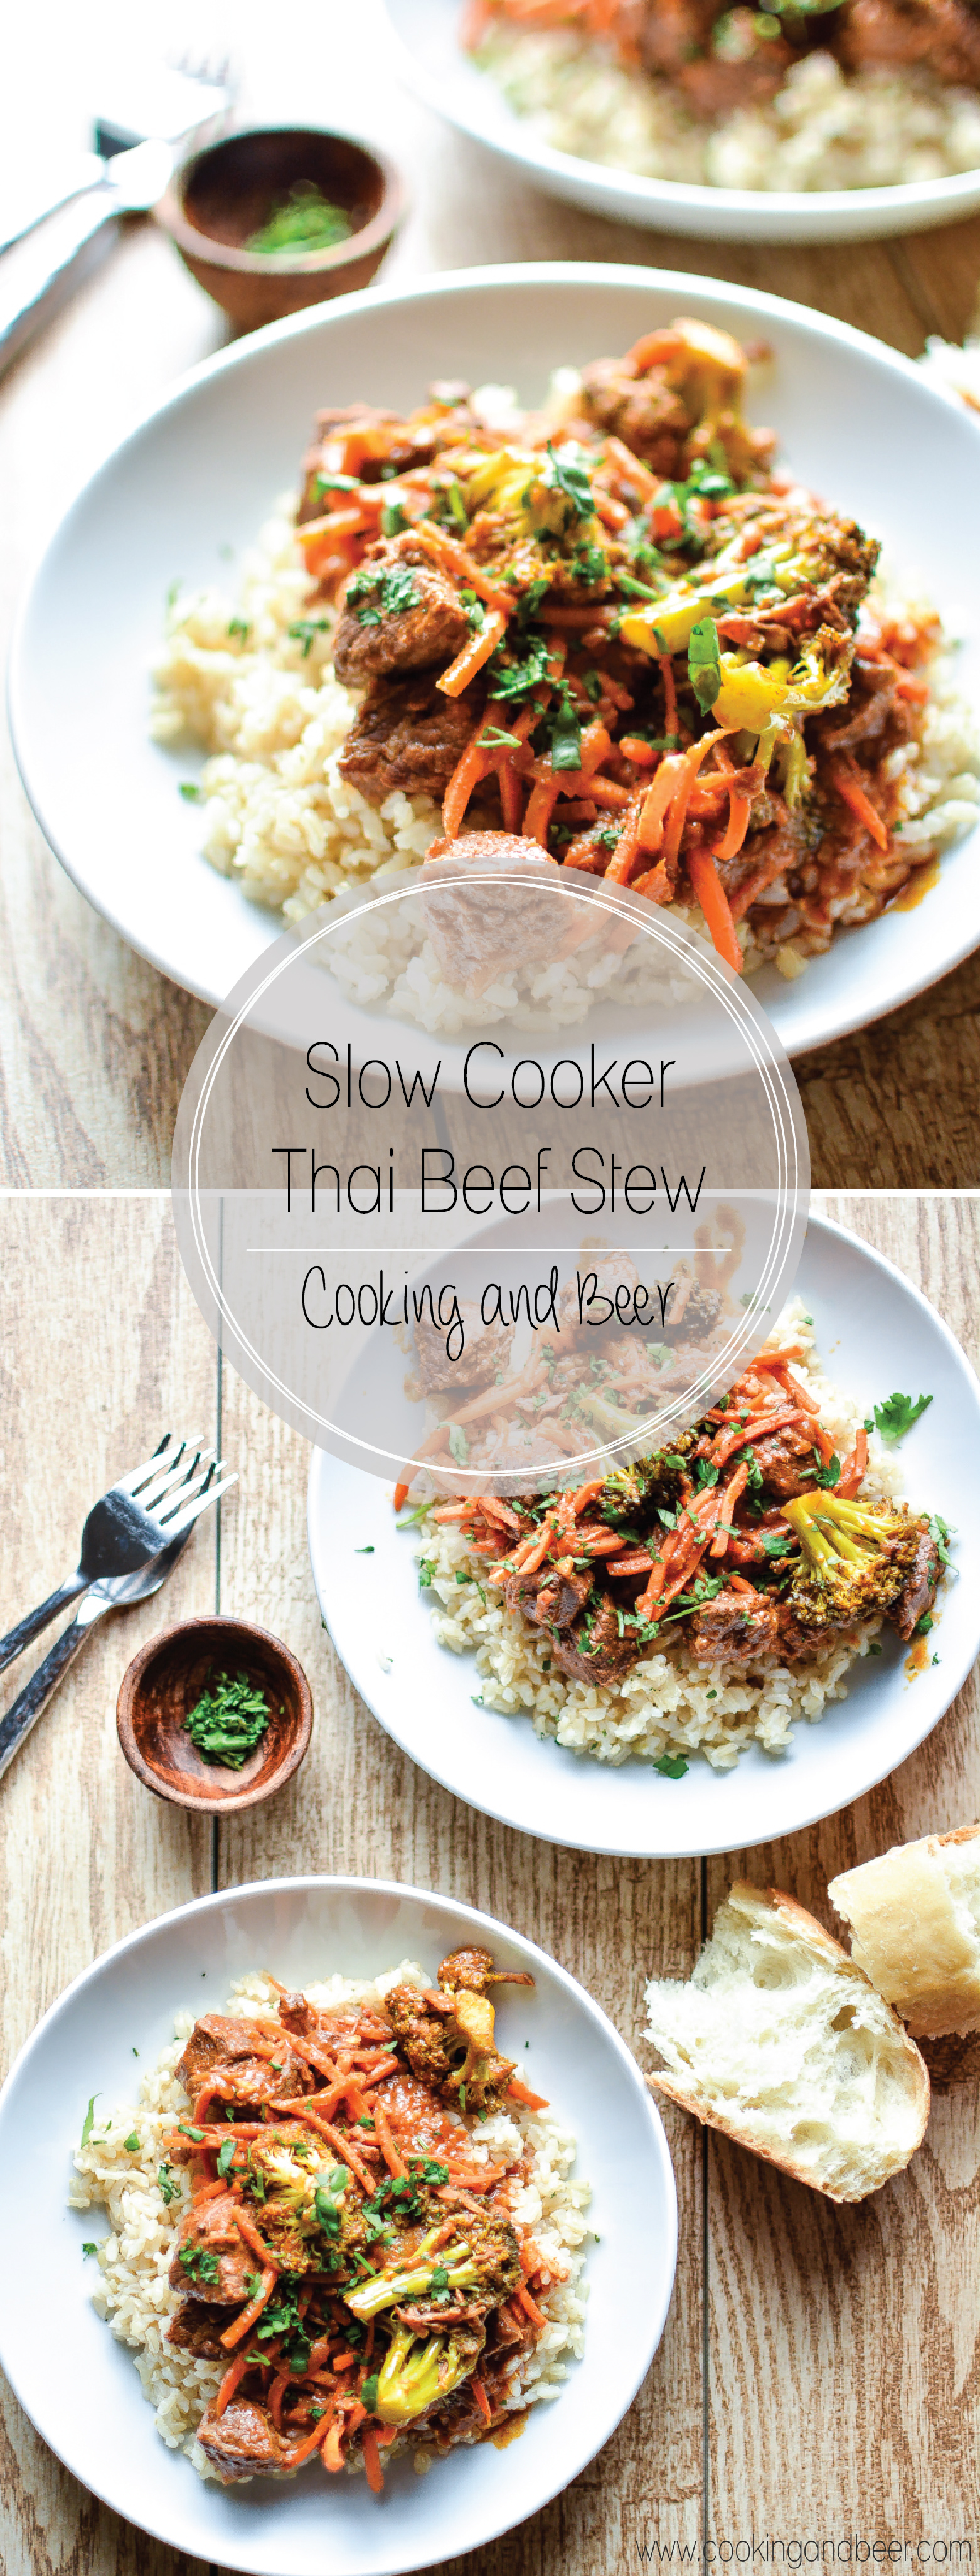 Slow Cooker Thai Beef Stew: a simple recipe that's delicious and good for you! | www.cookingandbeer.com